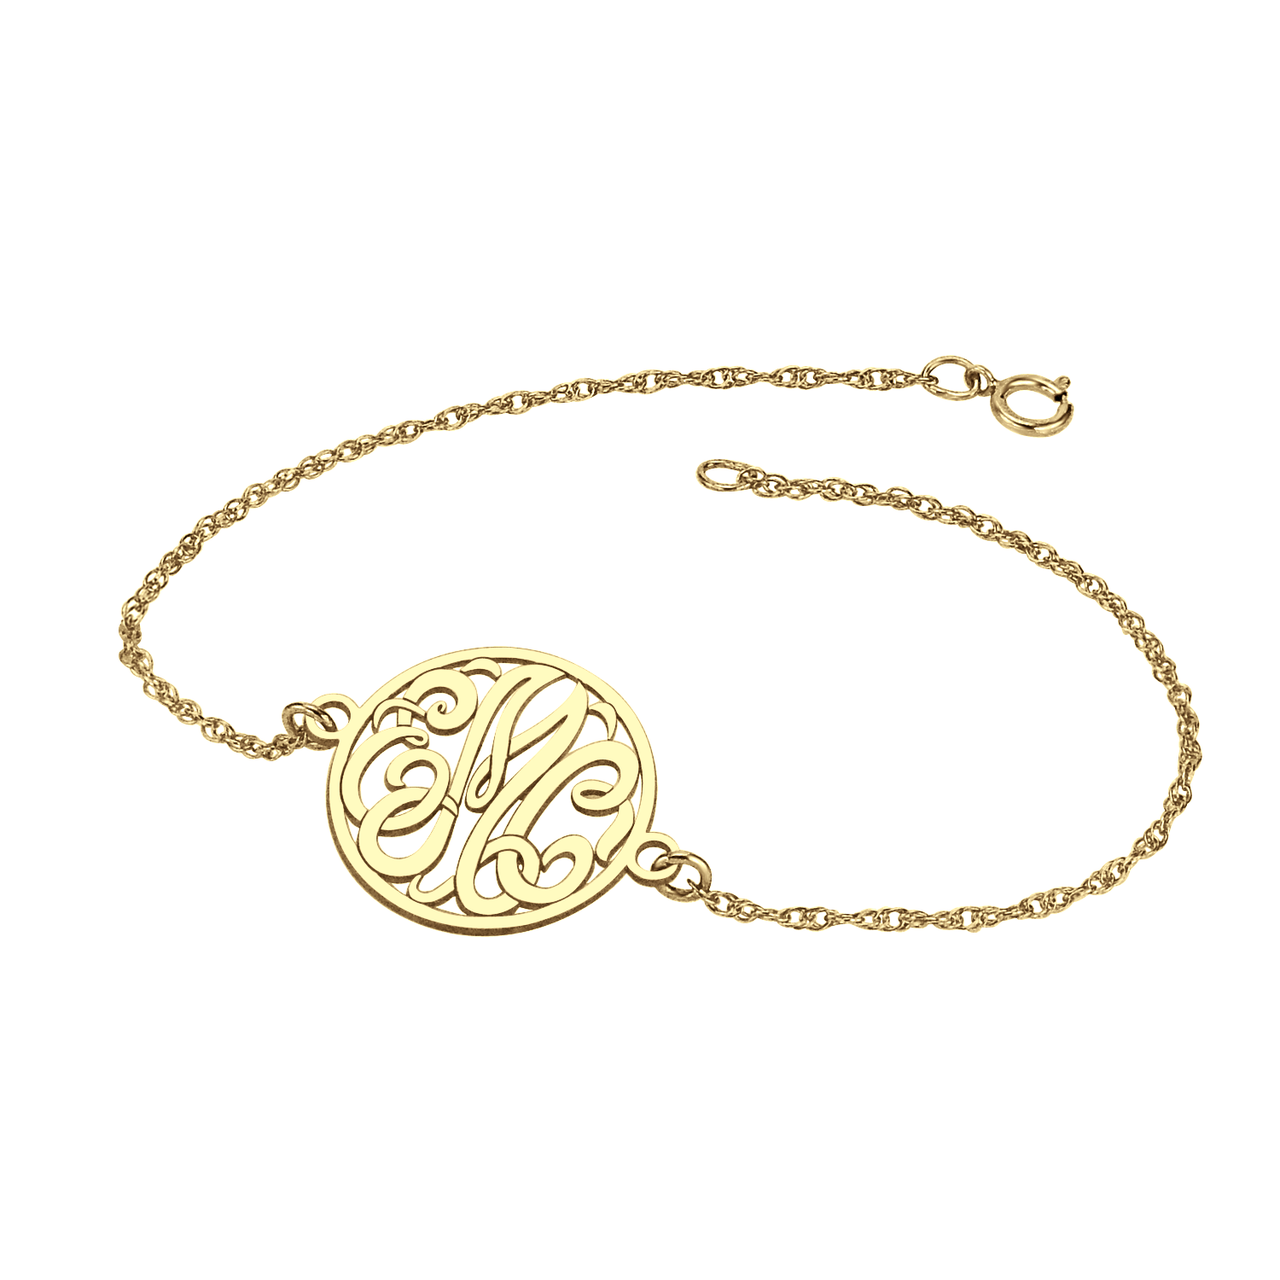  Solid 14k Yellow Gold Recessed Letters Circle Monogram